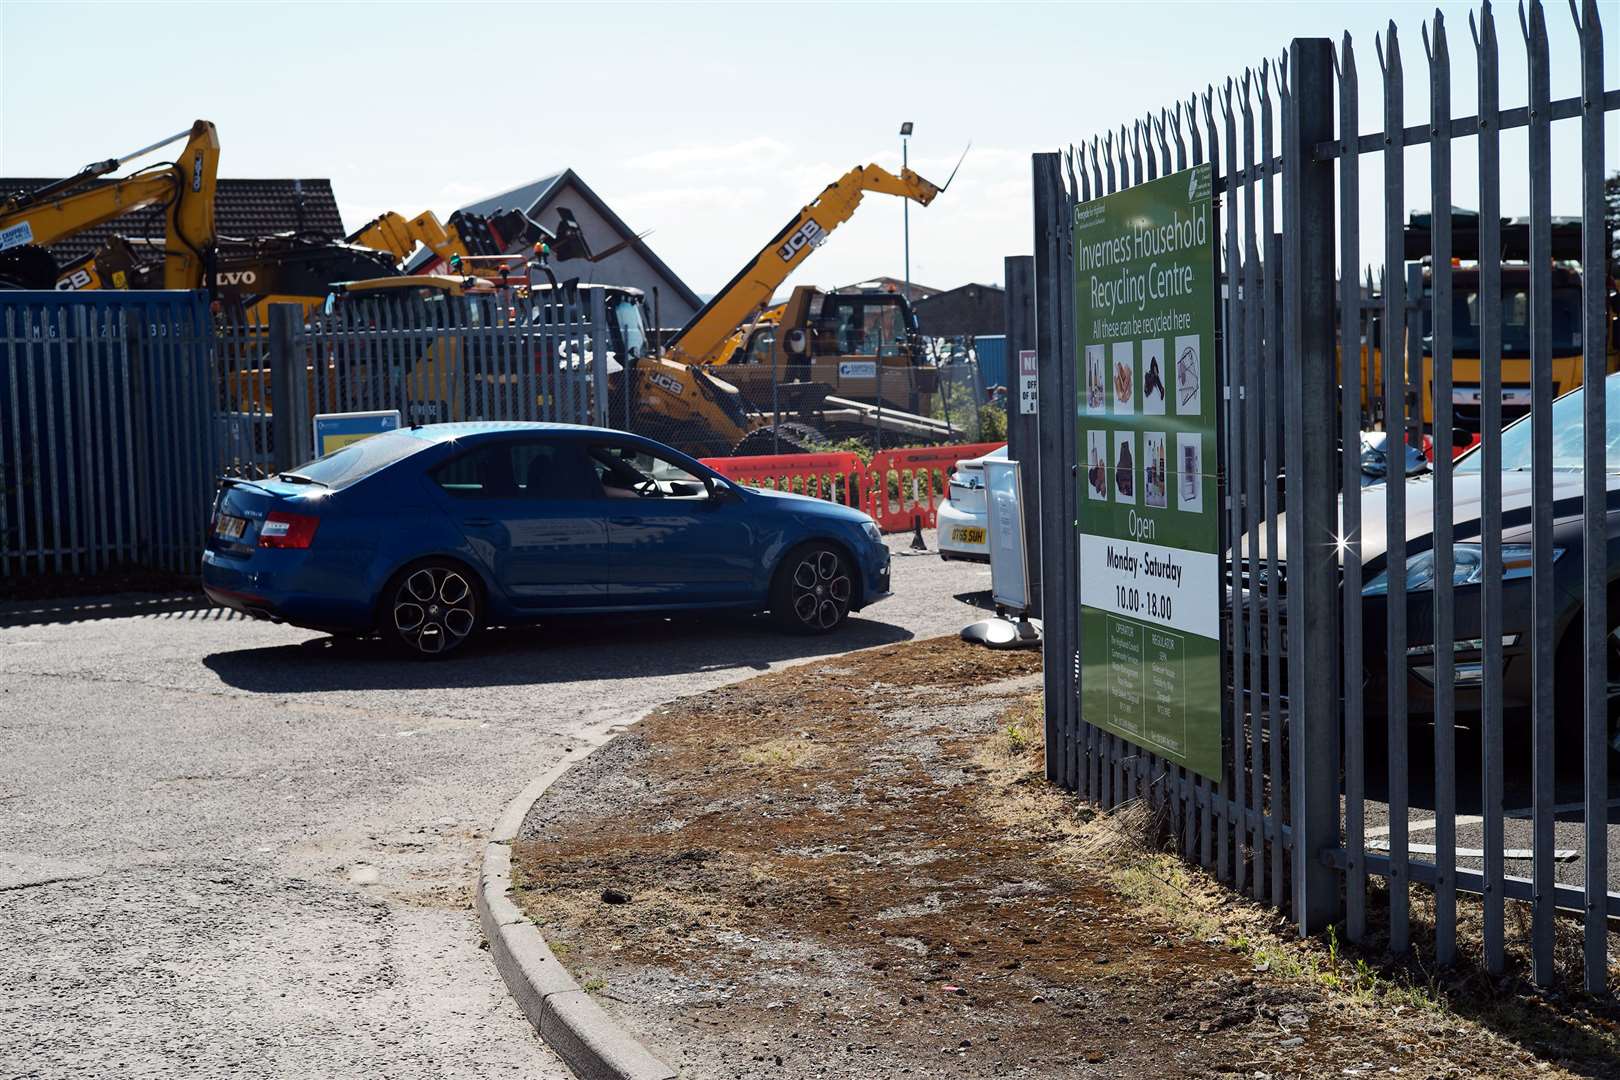 The Inverness Household Recycling Centre where the opening times have been criticised by a local councillor.